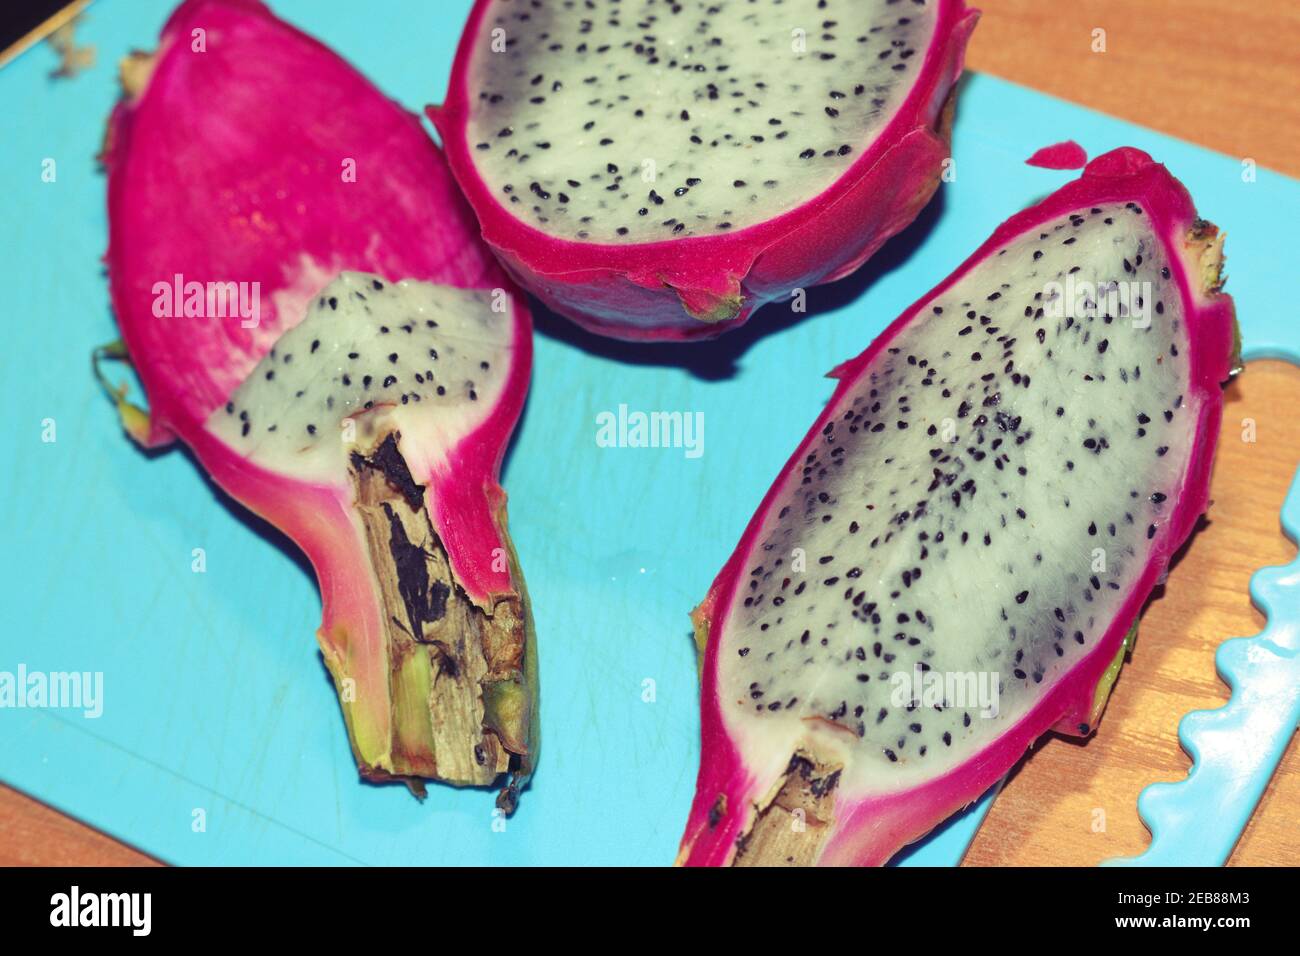 dragon fruit, sliced on blue plastic cutting board. half, quarter, pieces of tropical exotic fruit with bright pink skin and gray flesh with small bla Stock Photo